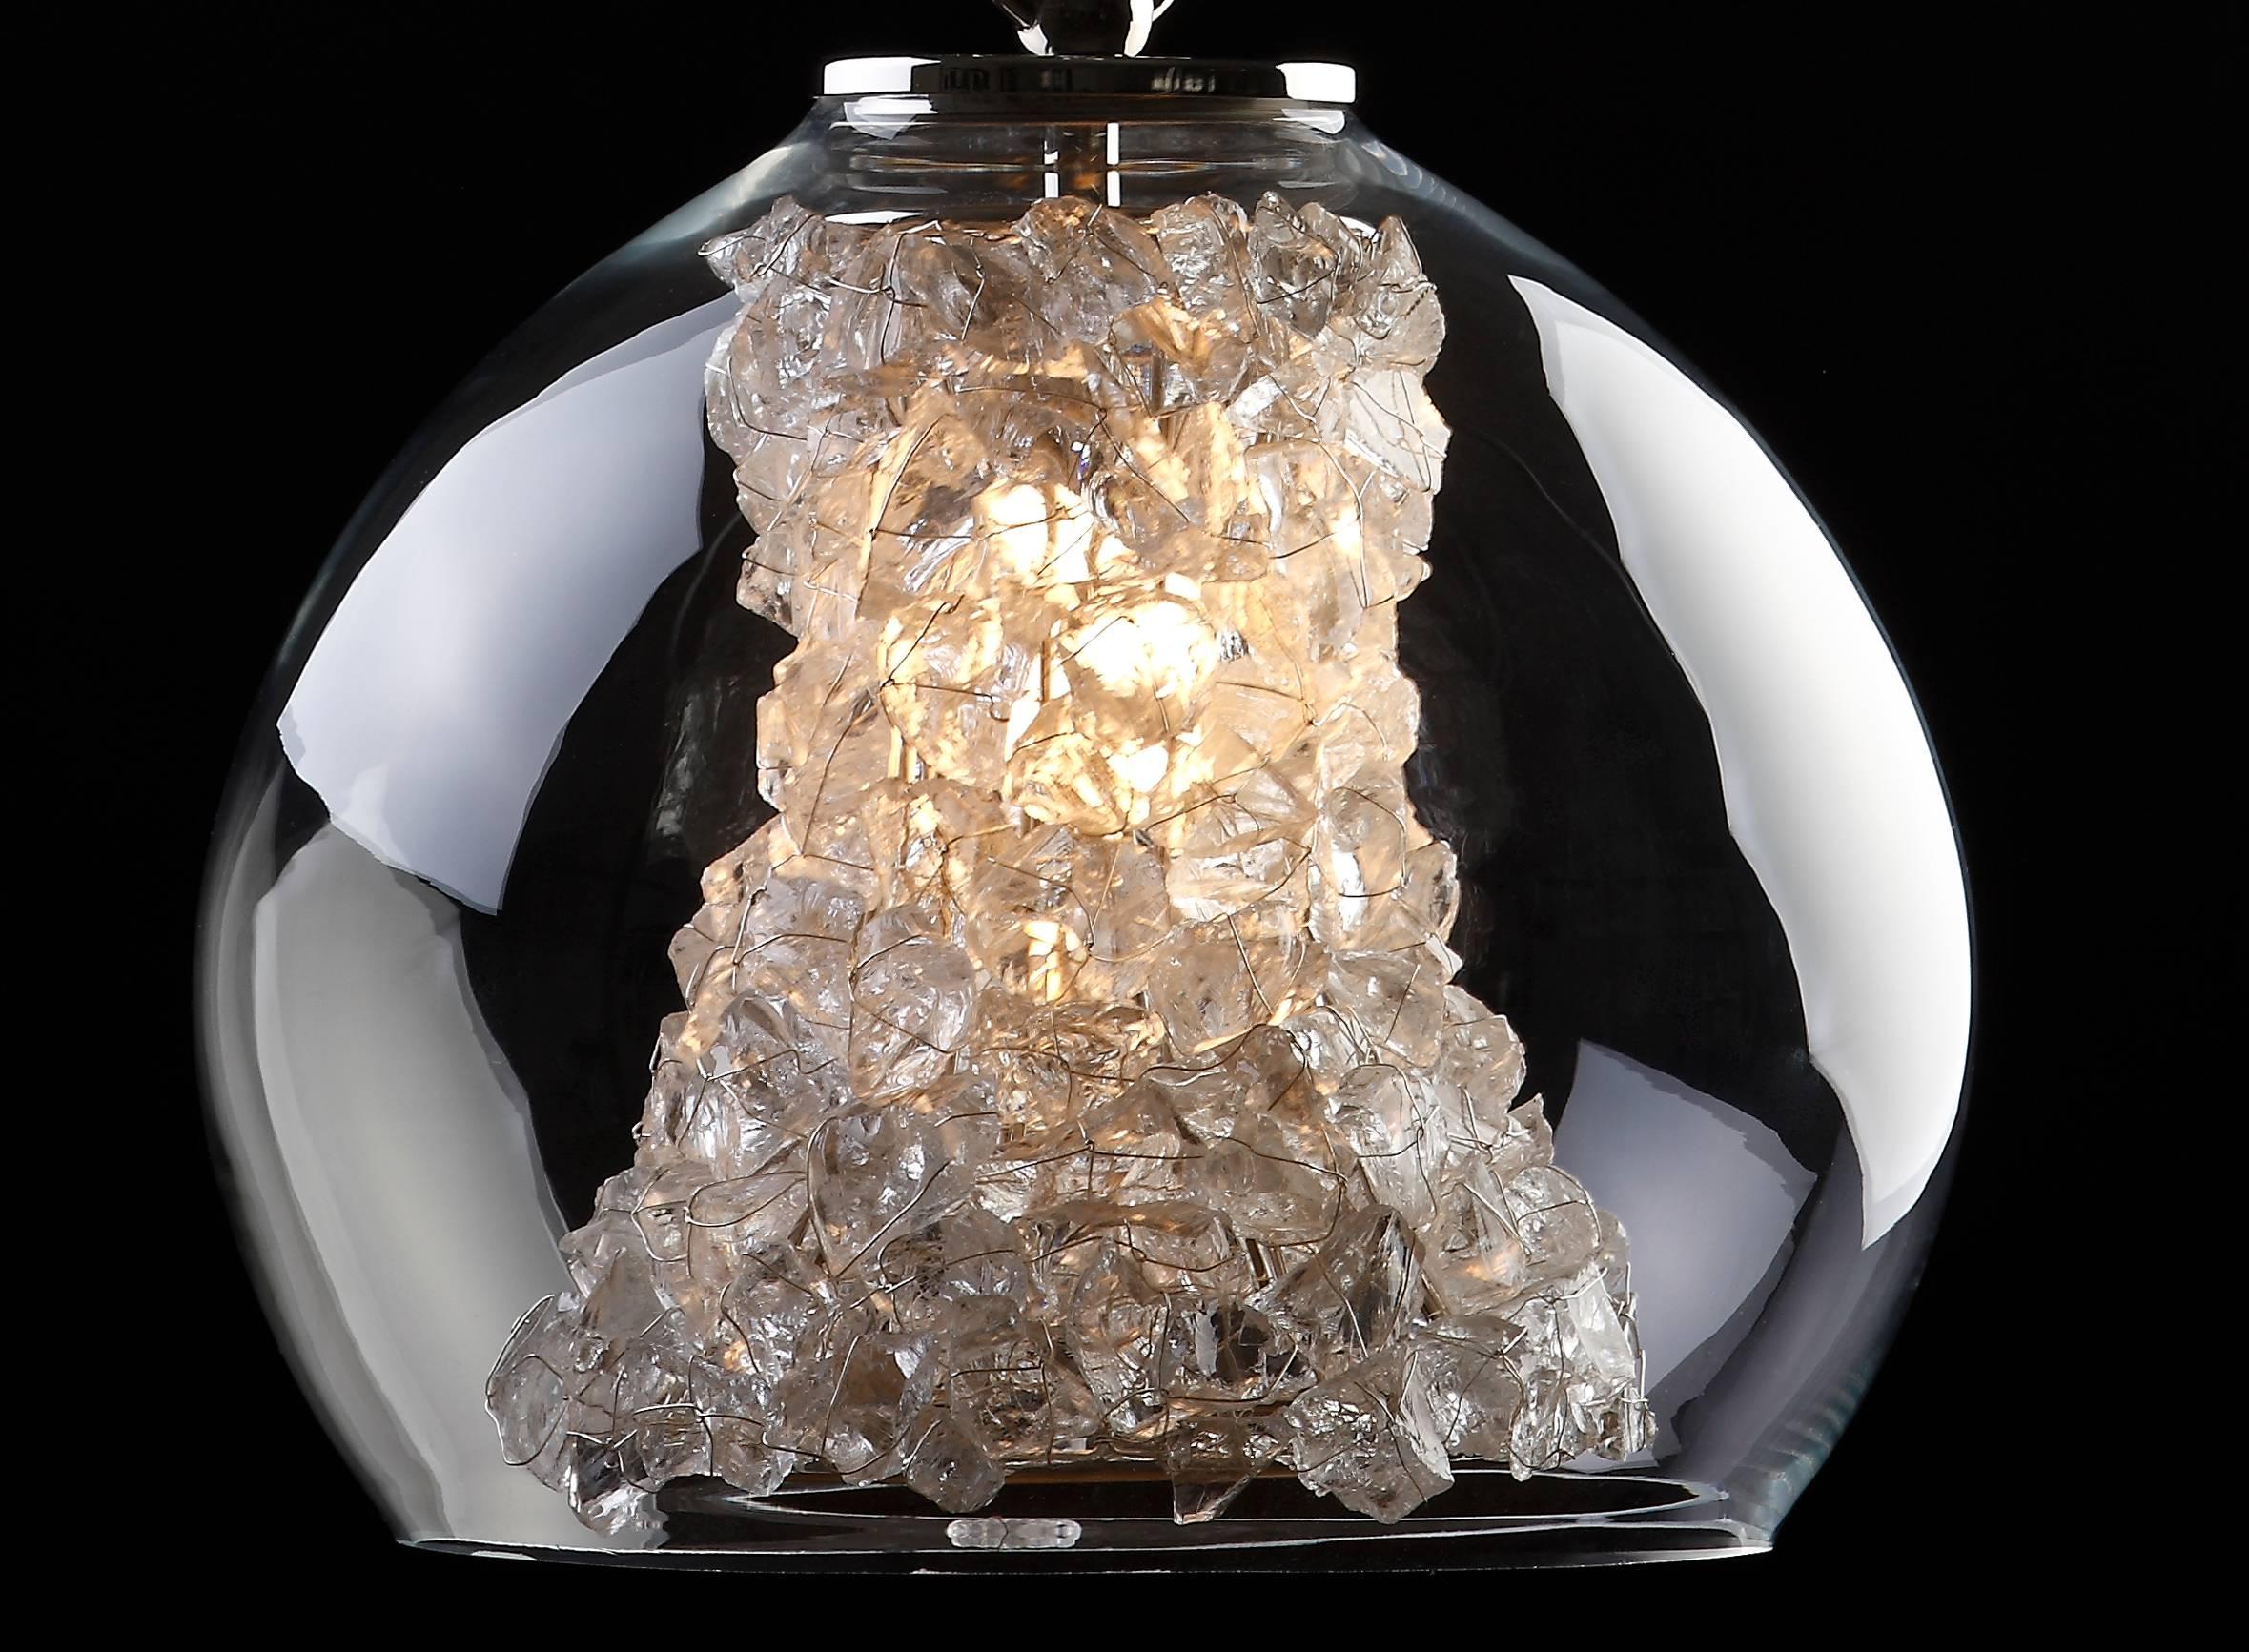 Elegant glowing glass to emulate crystals inside a round glass pendant.

Measures (cm):40 x 40 (with chain 80)
Lamps: one lamp E27 max. 40W
Class: class ii
Material: glass/brass
Finish: nickel
Weight: 10 kg
Packaging (cm):60 x 60 x 60.
 